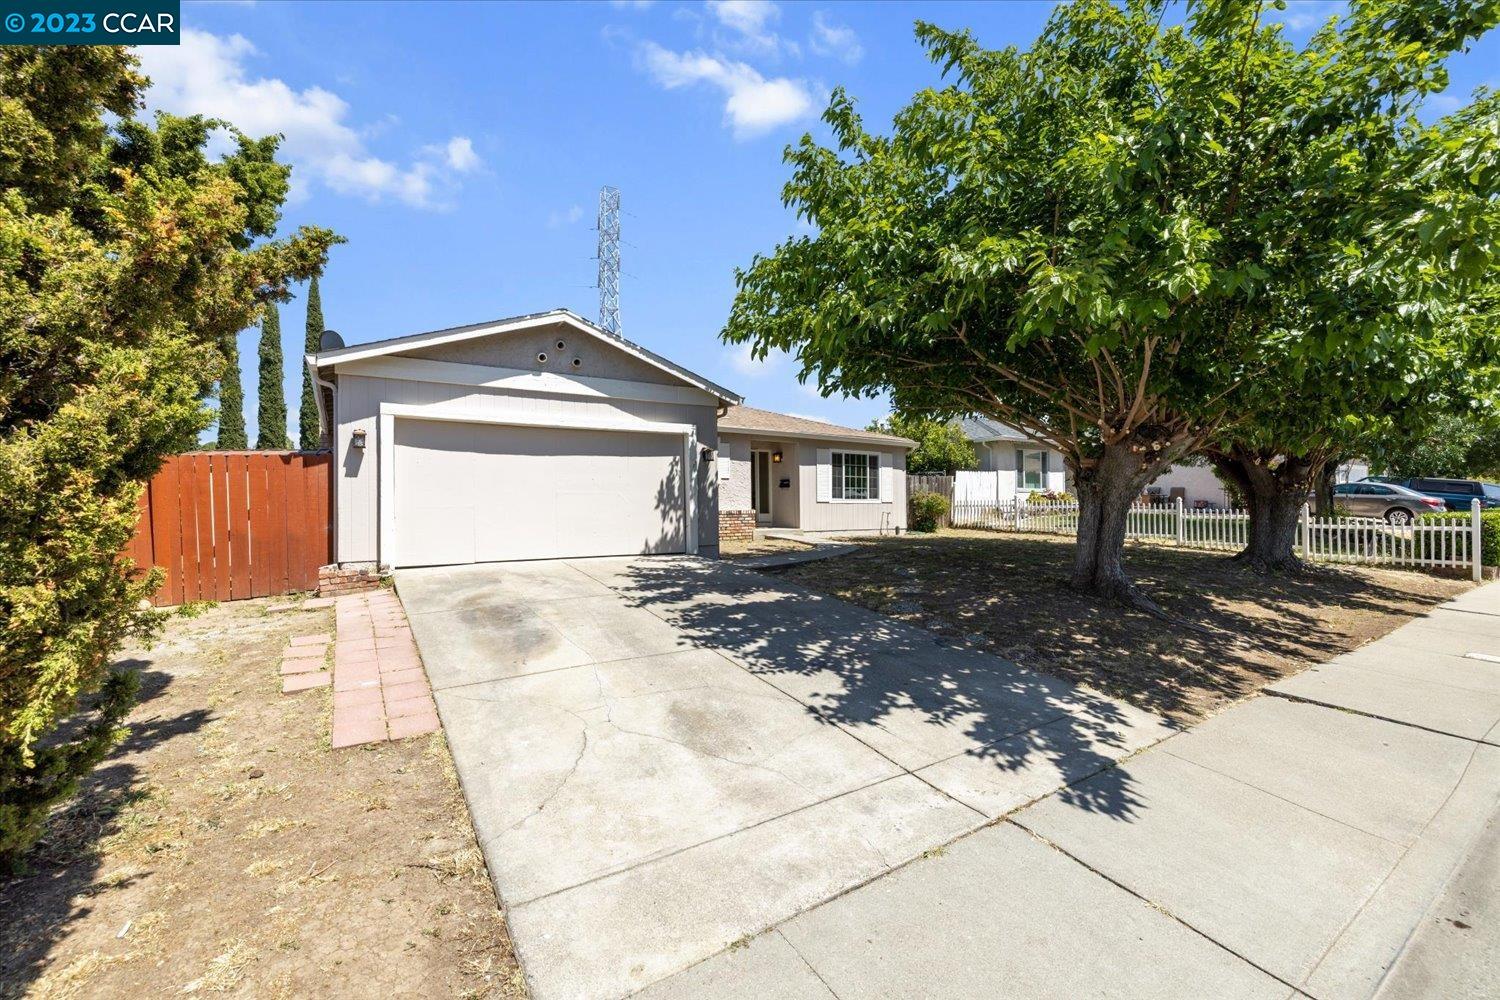 Located in the sought-after Vista Del Rio neighborhood, this newly updated 4-bedroom, 2-bathroom home offers a modern feel with timeless flooring, new carpet  and fresh paint inside and out. Upon entering the home, you'll be greeted by a brightly lit living room and hallway that leads to the bedrooms. Off the entrance is the kitchen with an eat-in dining area perfect for meals and entertaining. The adjacent family room features a tall brick fireplace, ceiling fan, and access to the garage and backyard, adding warmth, coziness, and functionality. All bedrooms have been updated with fresh paint, new carpet, and mirrored closet doors, creating a clean and inviting atmosphere. The renovated bathrooms boast sleek features like new vanity cabinets, white Quartz countertops, vinyl flooring and updated hardware. The spacious backyard offers a clean slate, allowing you to customize it to suit your preferences and accommodate various activities. Residents of this home can easily access a nearby coffee shop for their morning coffee, enjoy various recreational activities at the nearby park, and take advantage of the conveniently located dog park. The home is also located near Foothill Elementary. Don't miss out on the opportunity to own this desirable home.